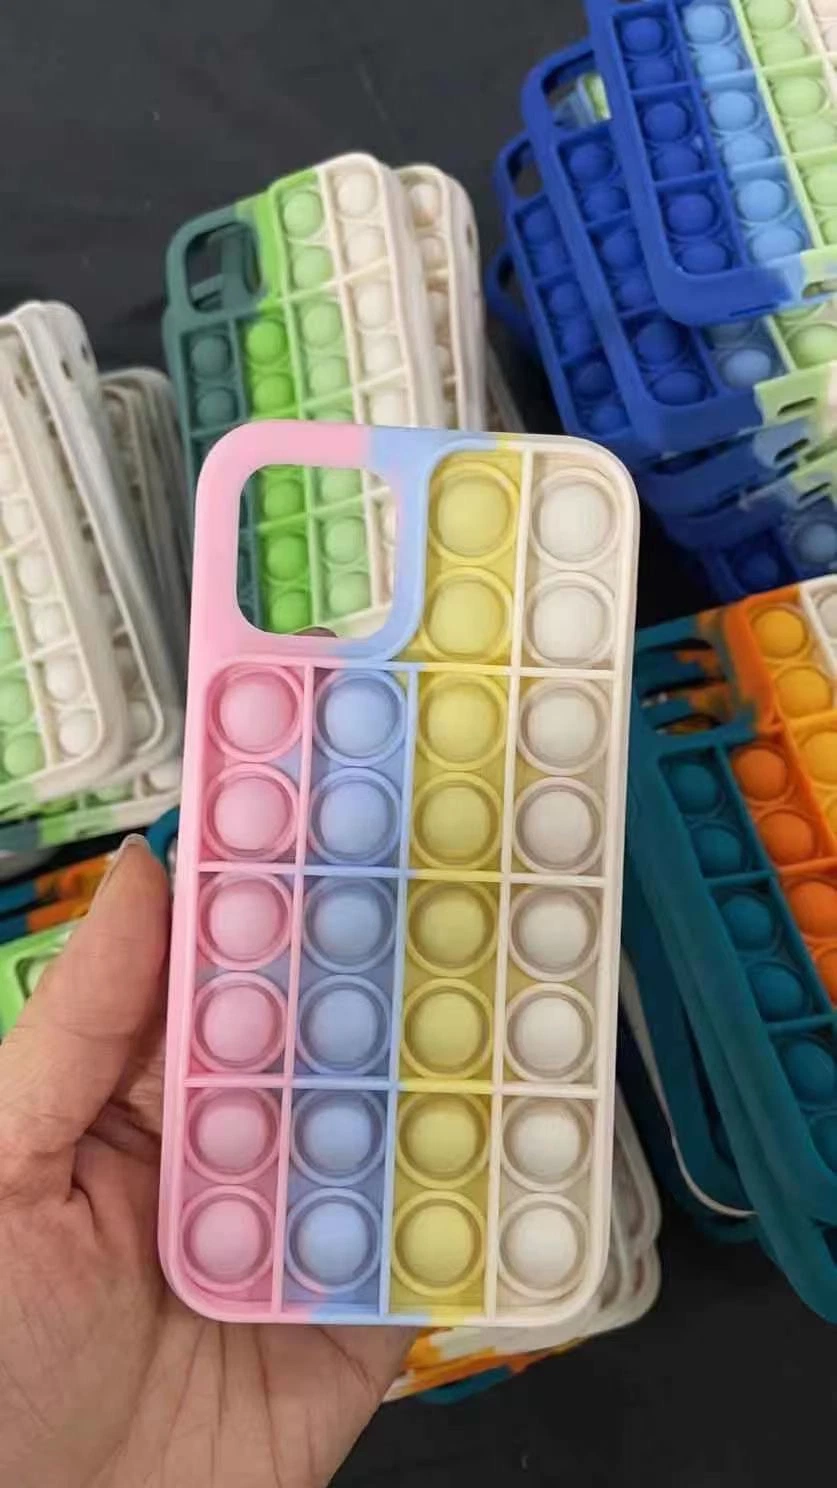 Latest Popular New Design Stress Relief Phone Case Wholesale Mobile Phone Accessories Fancy Cover for iPhone 11 12 PRO Max Cell Phone Cover Factory Price Case